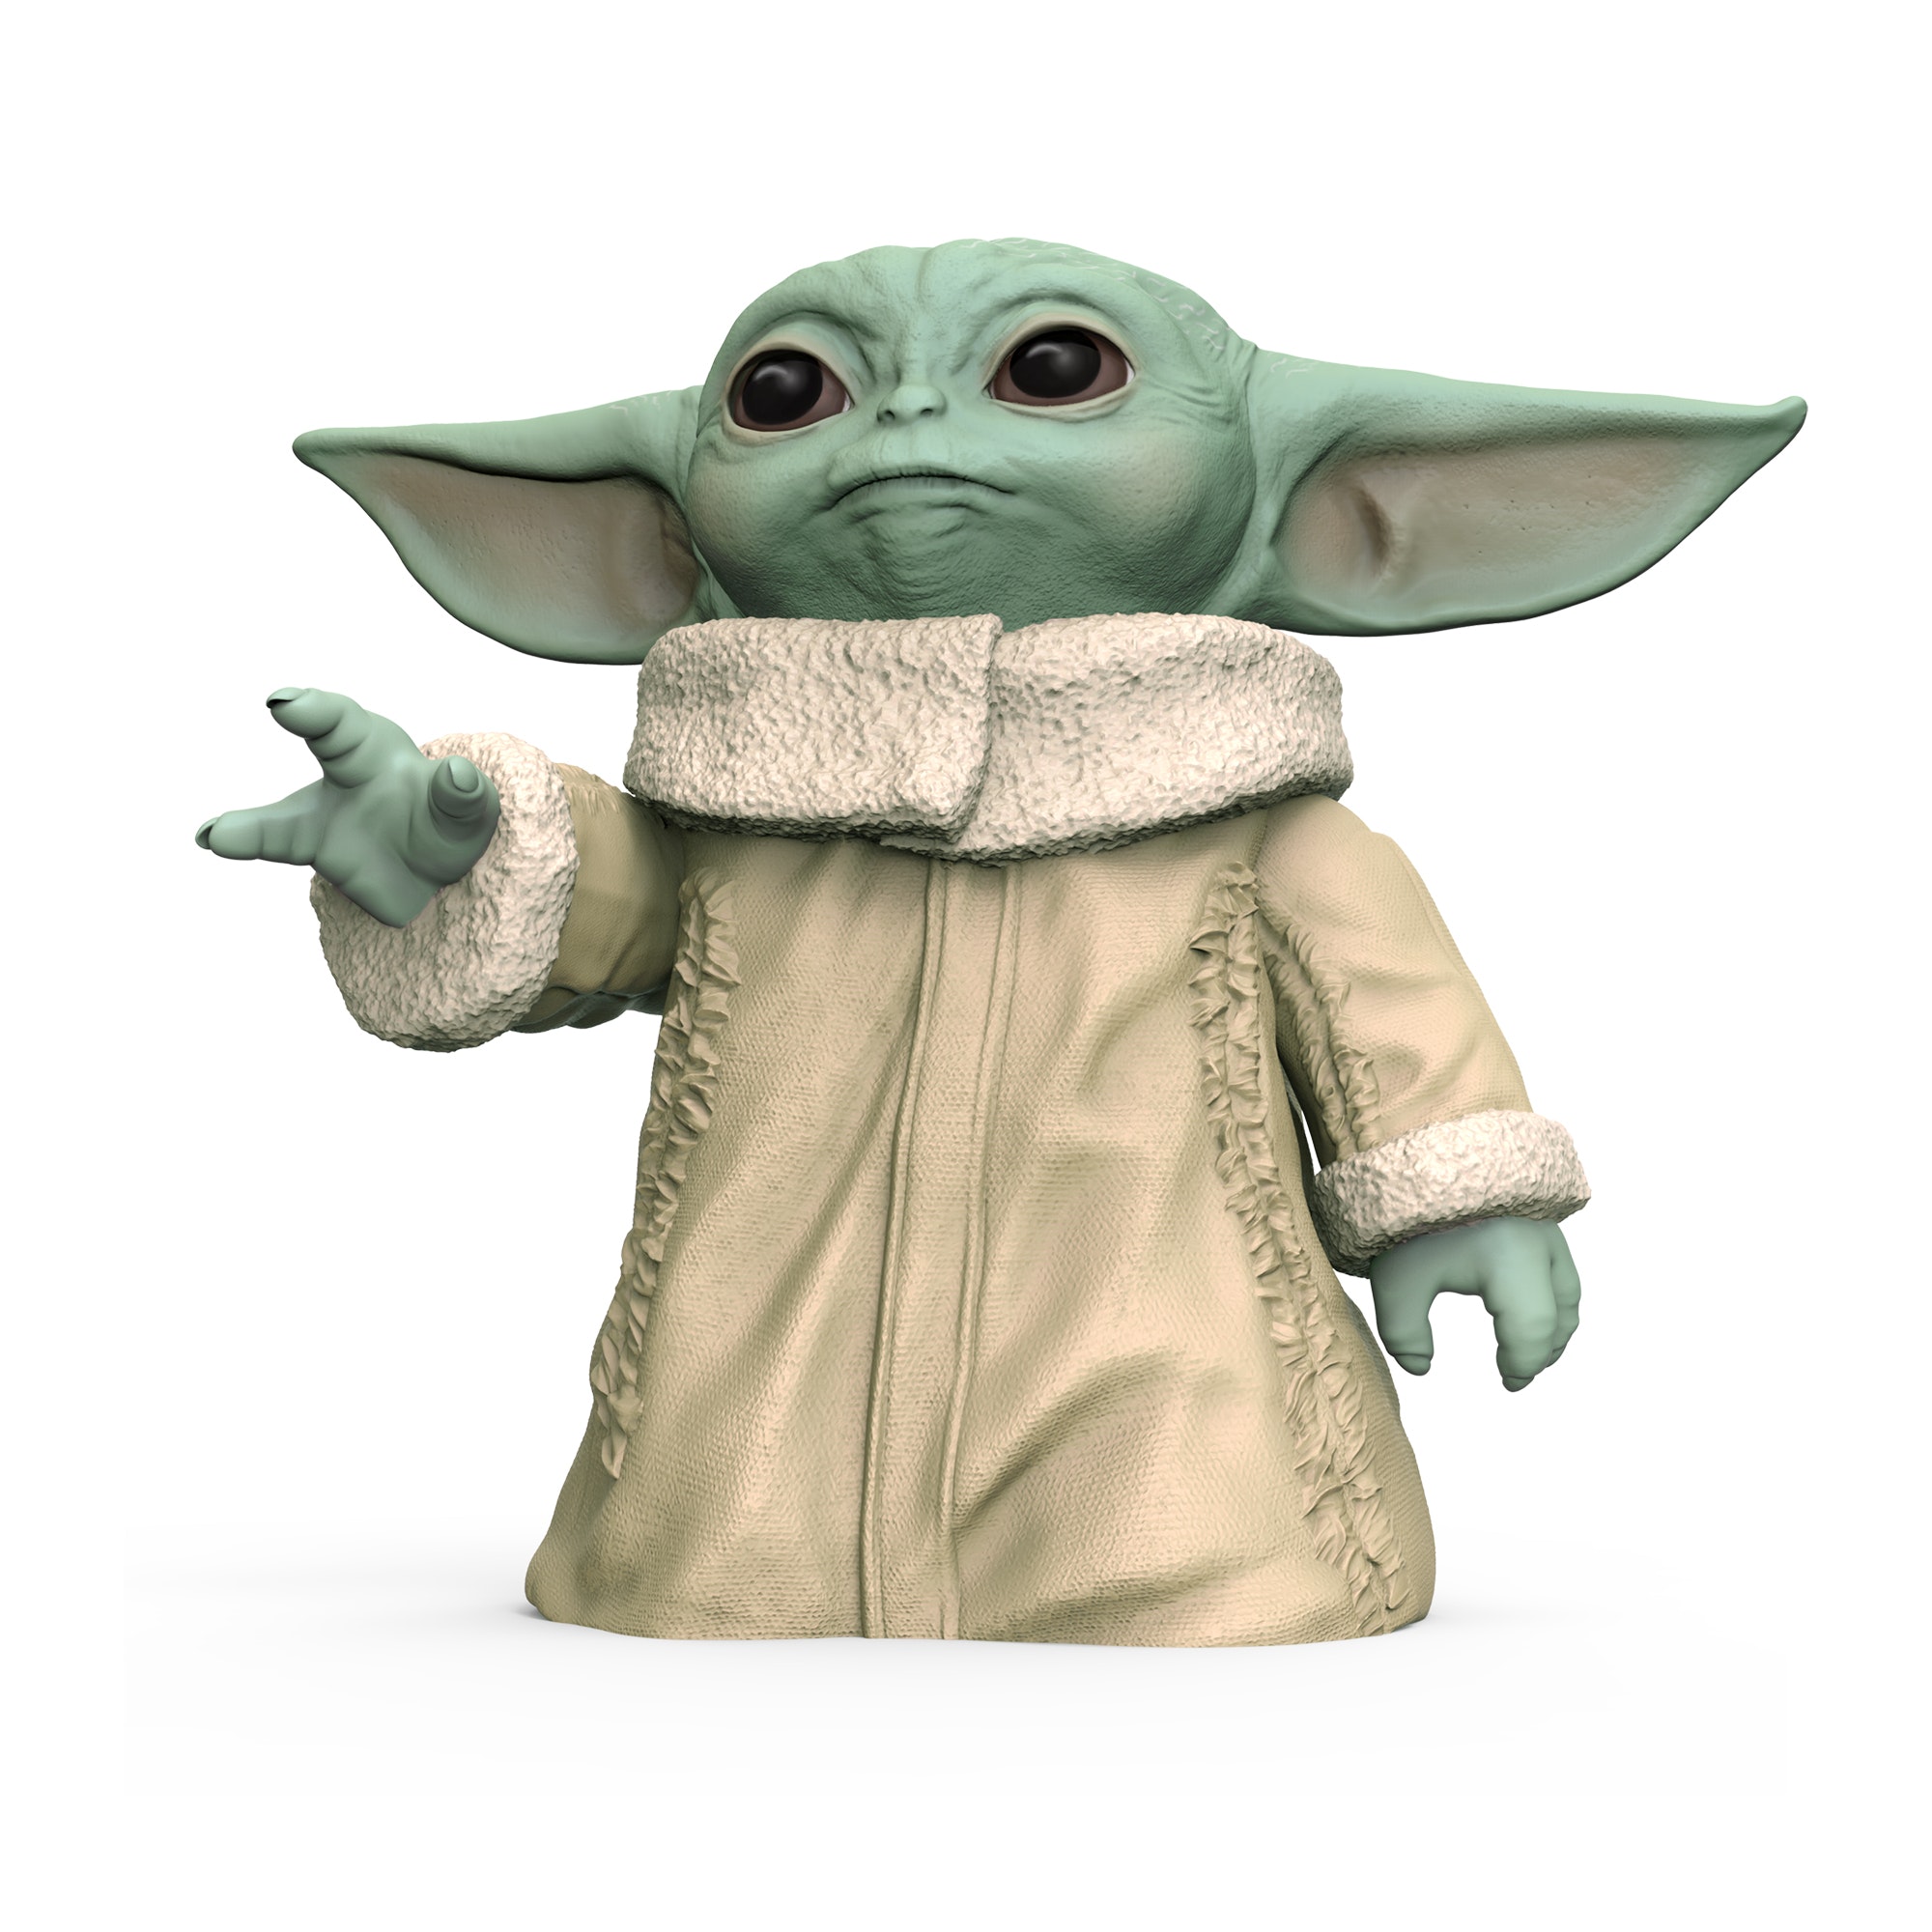 Hasbro Star Wars – The Child (AKA Baby Yoda) Products Set for 2020 Release